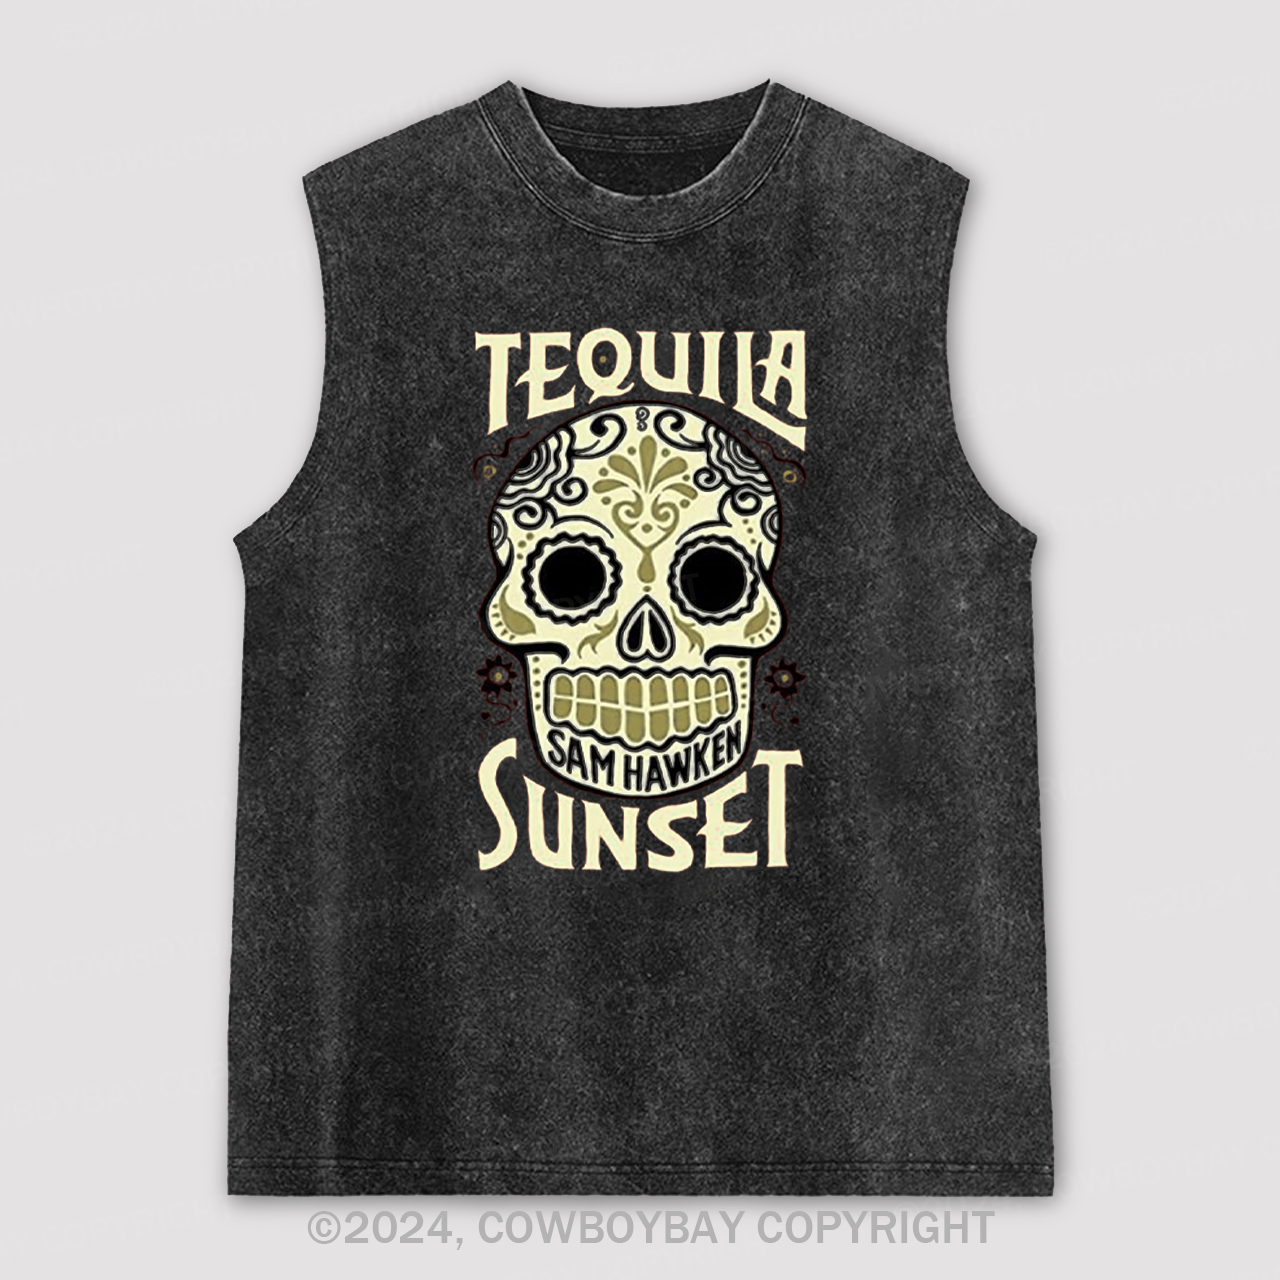 Tequila Sunset Washed Tanks